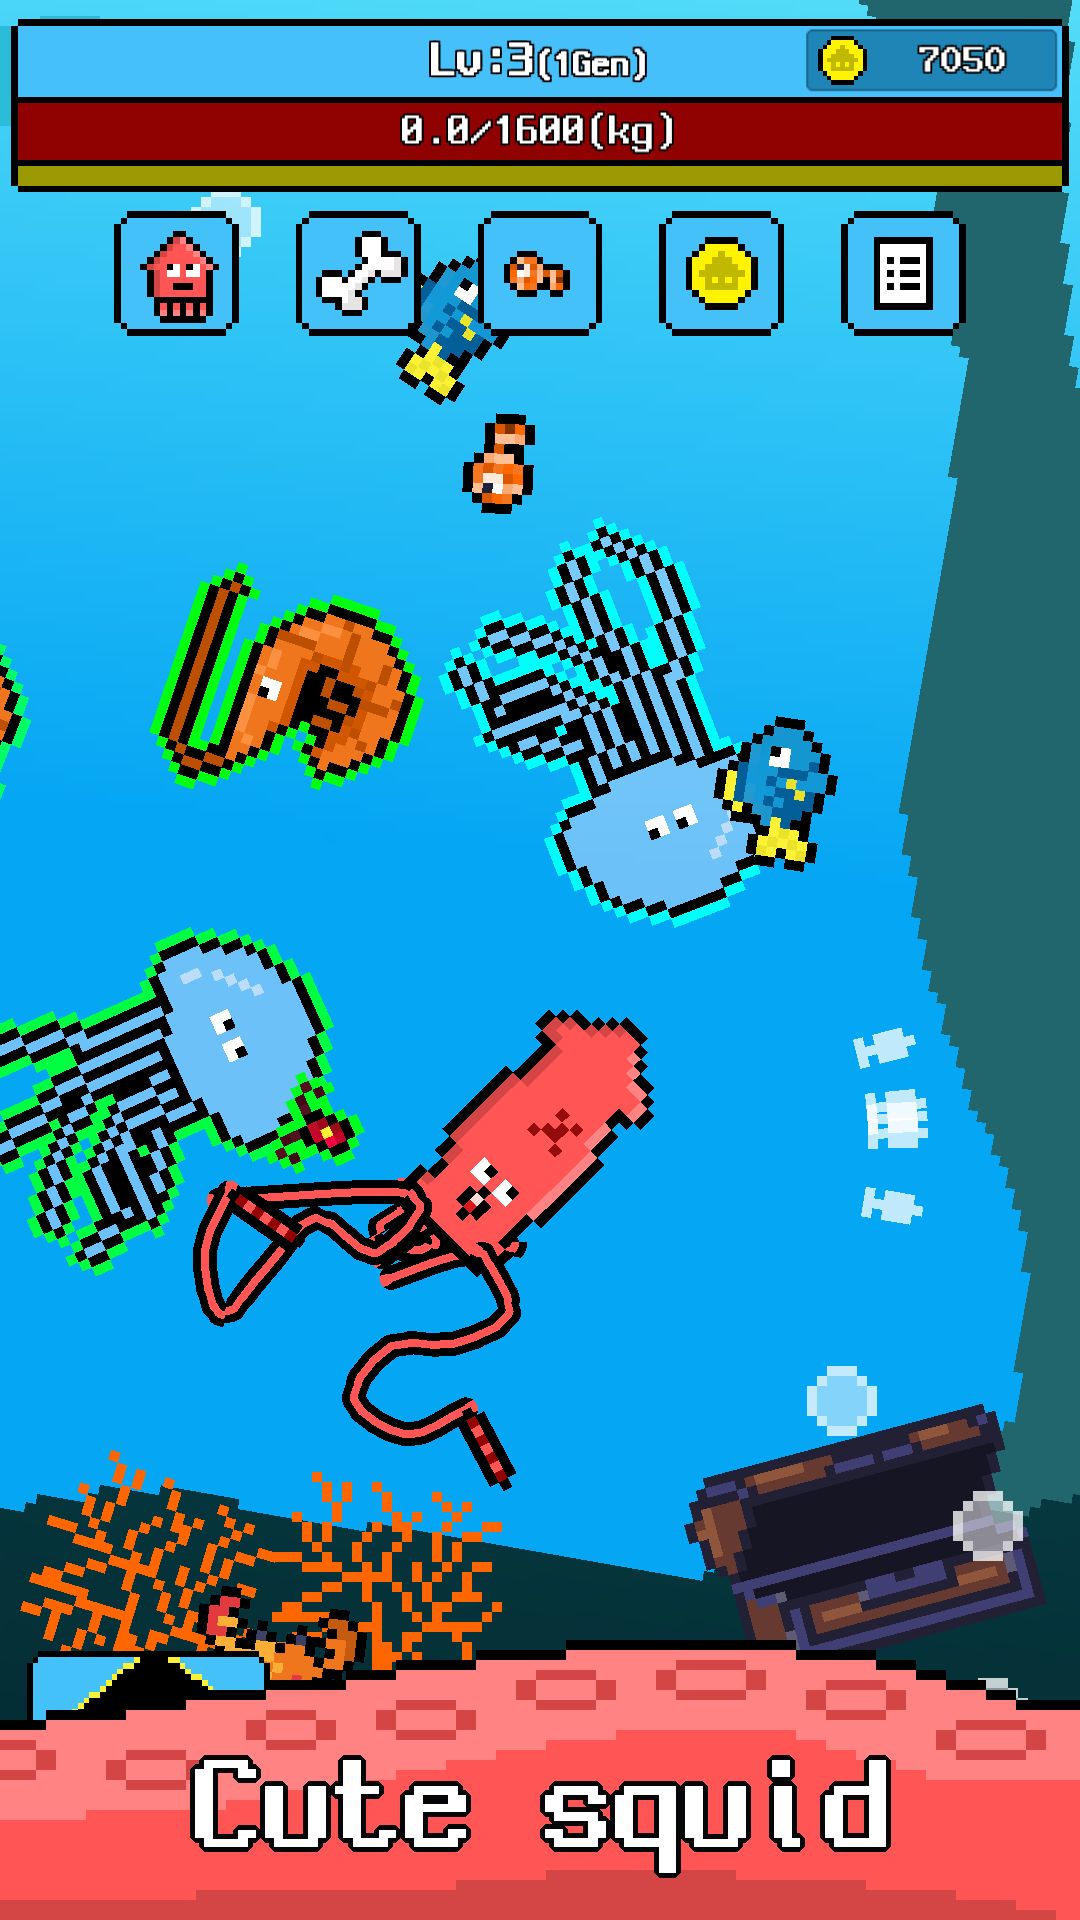 Gameplay of the Giant squid for Android phone or tablet.